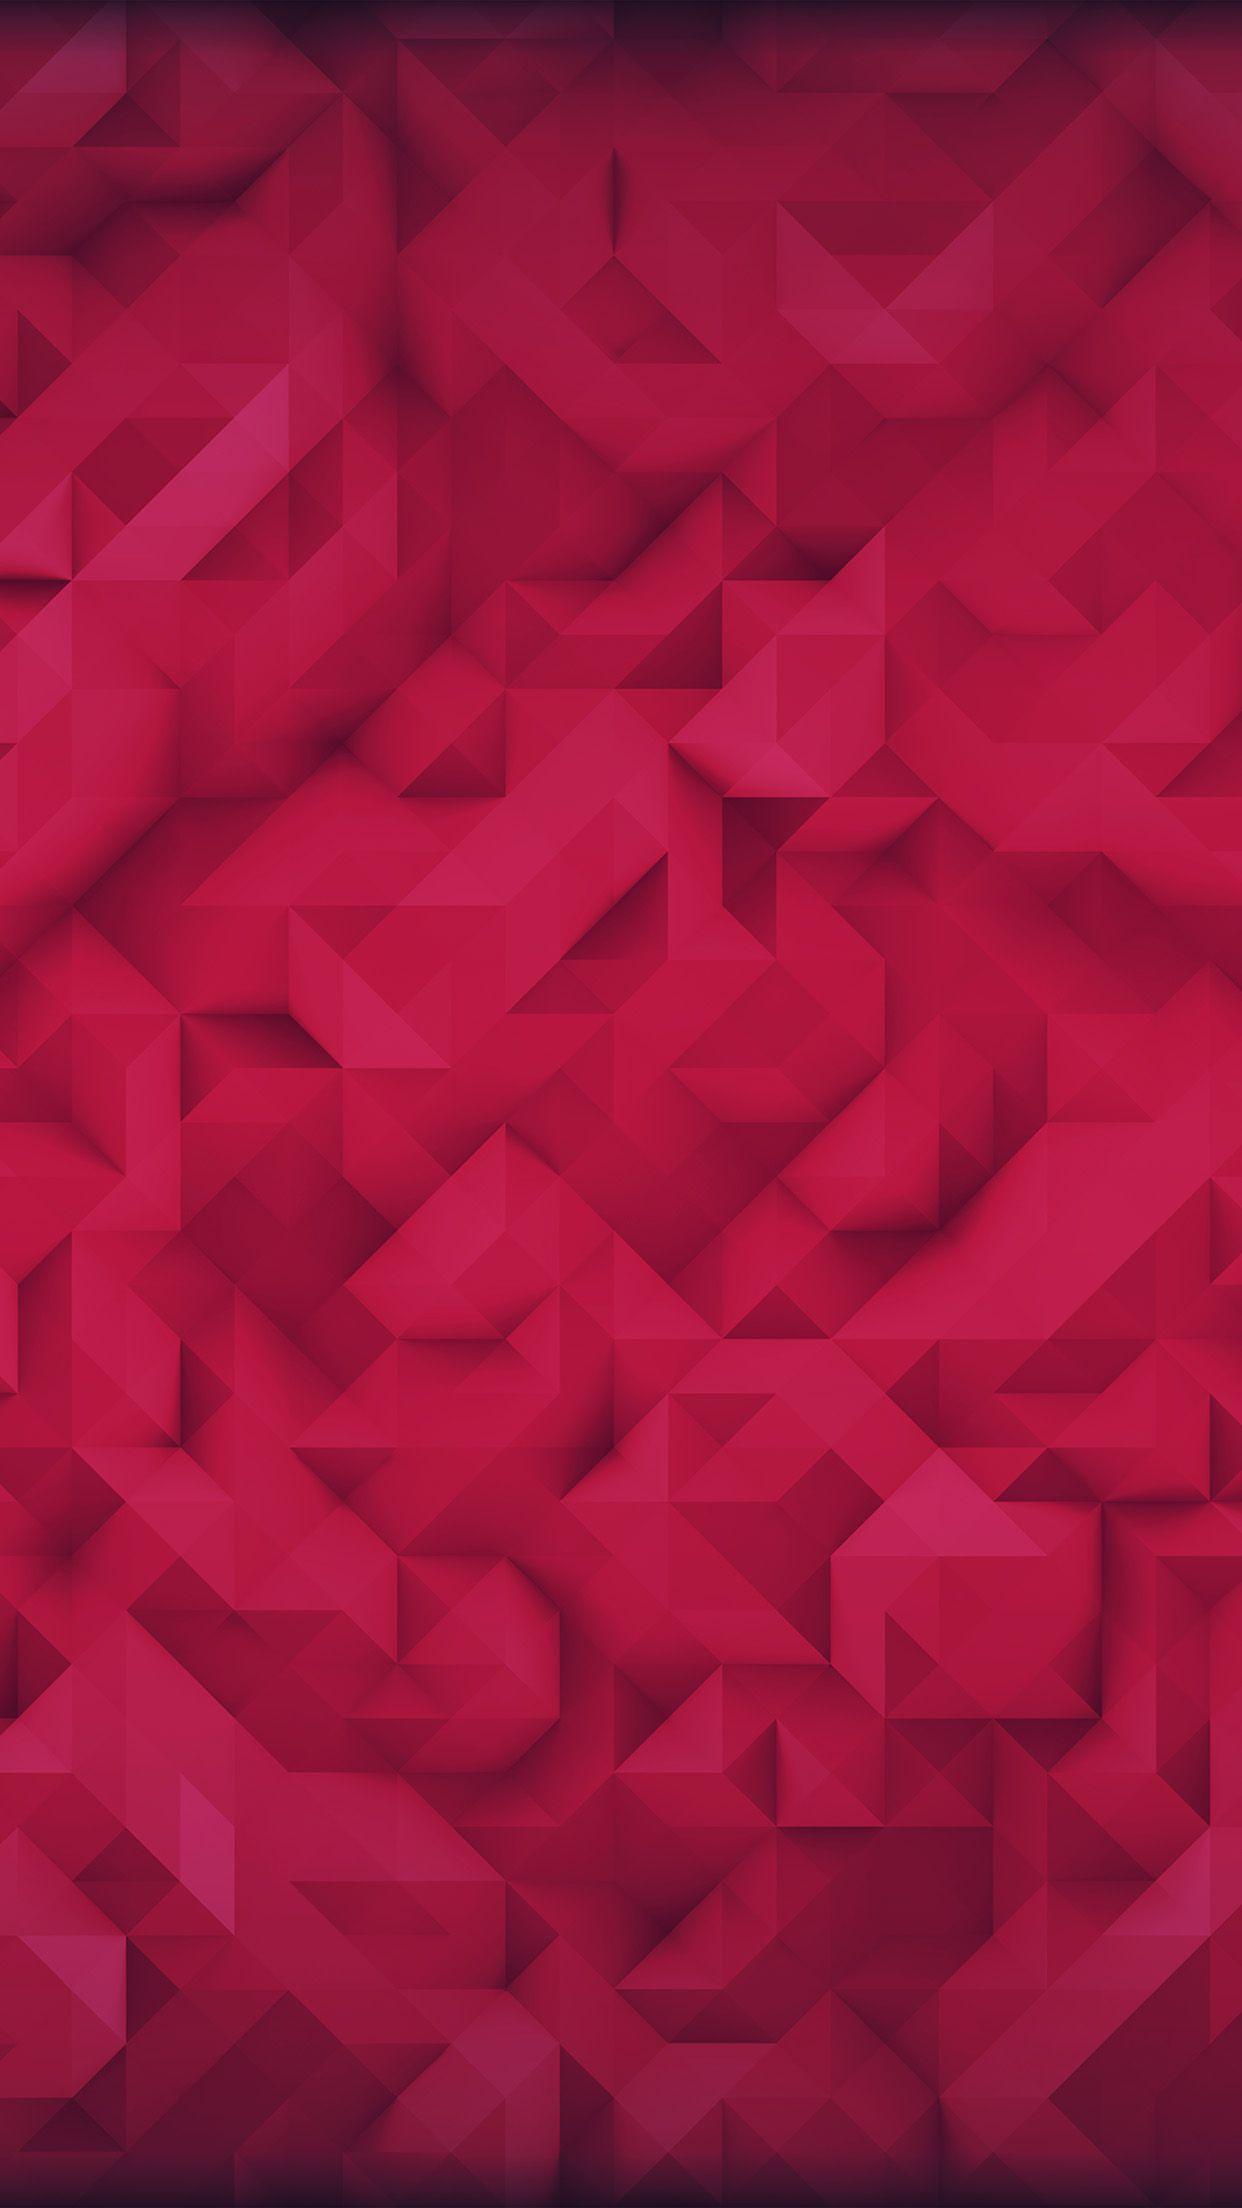 6 of Red Triangles Logo - iPhone6papers.com | iPhone 6 wallpaper | vp35-polygon-art-red ...